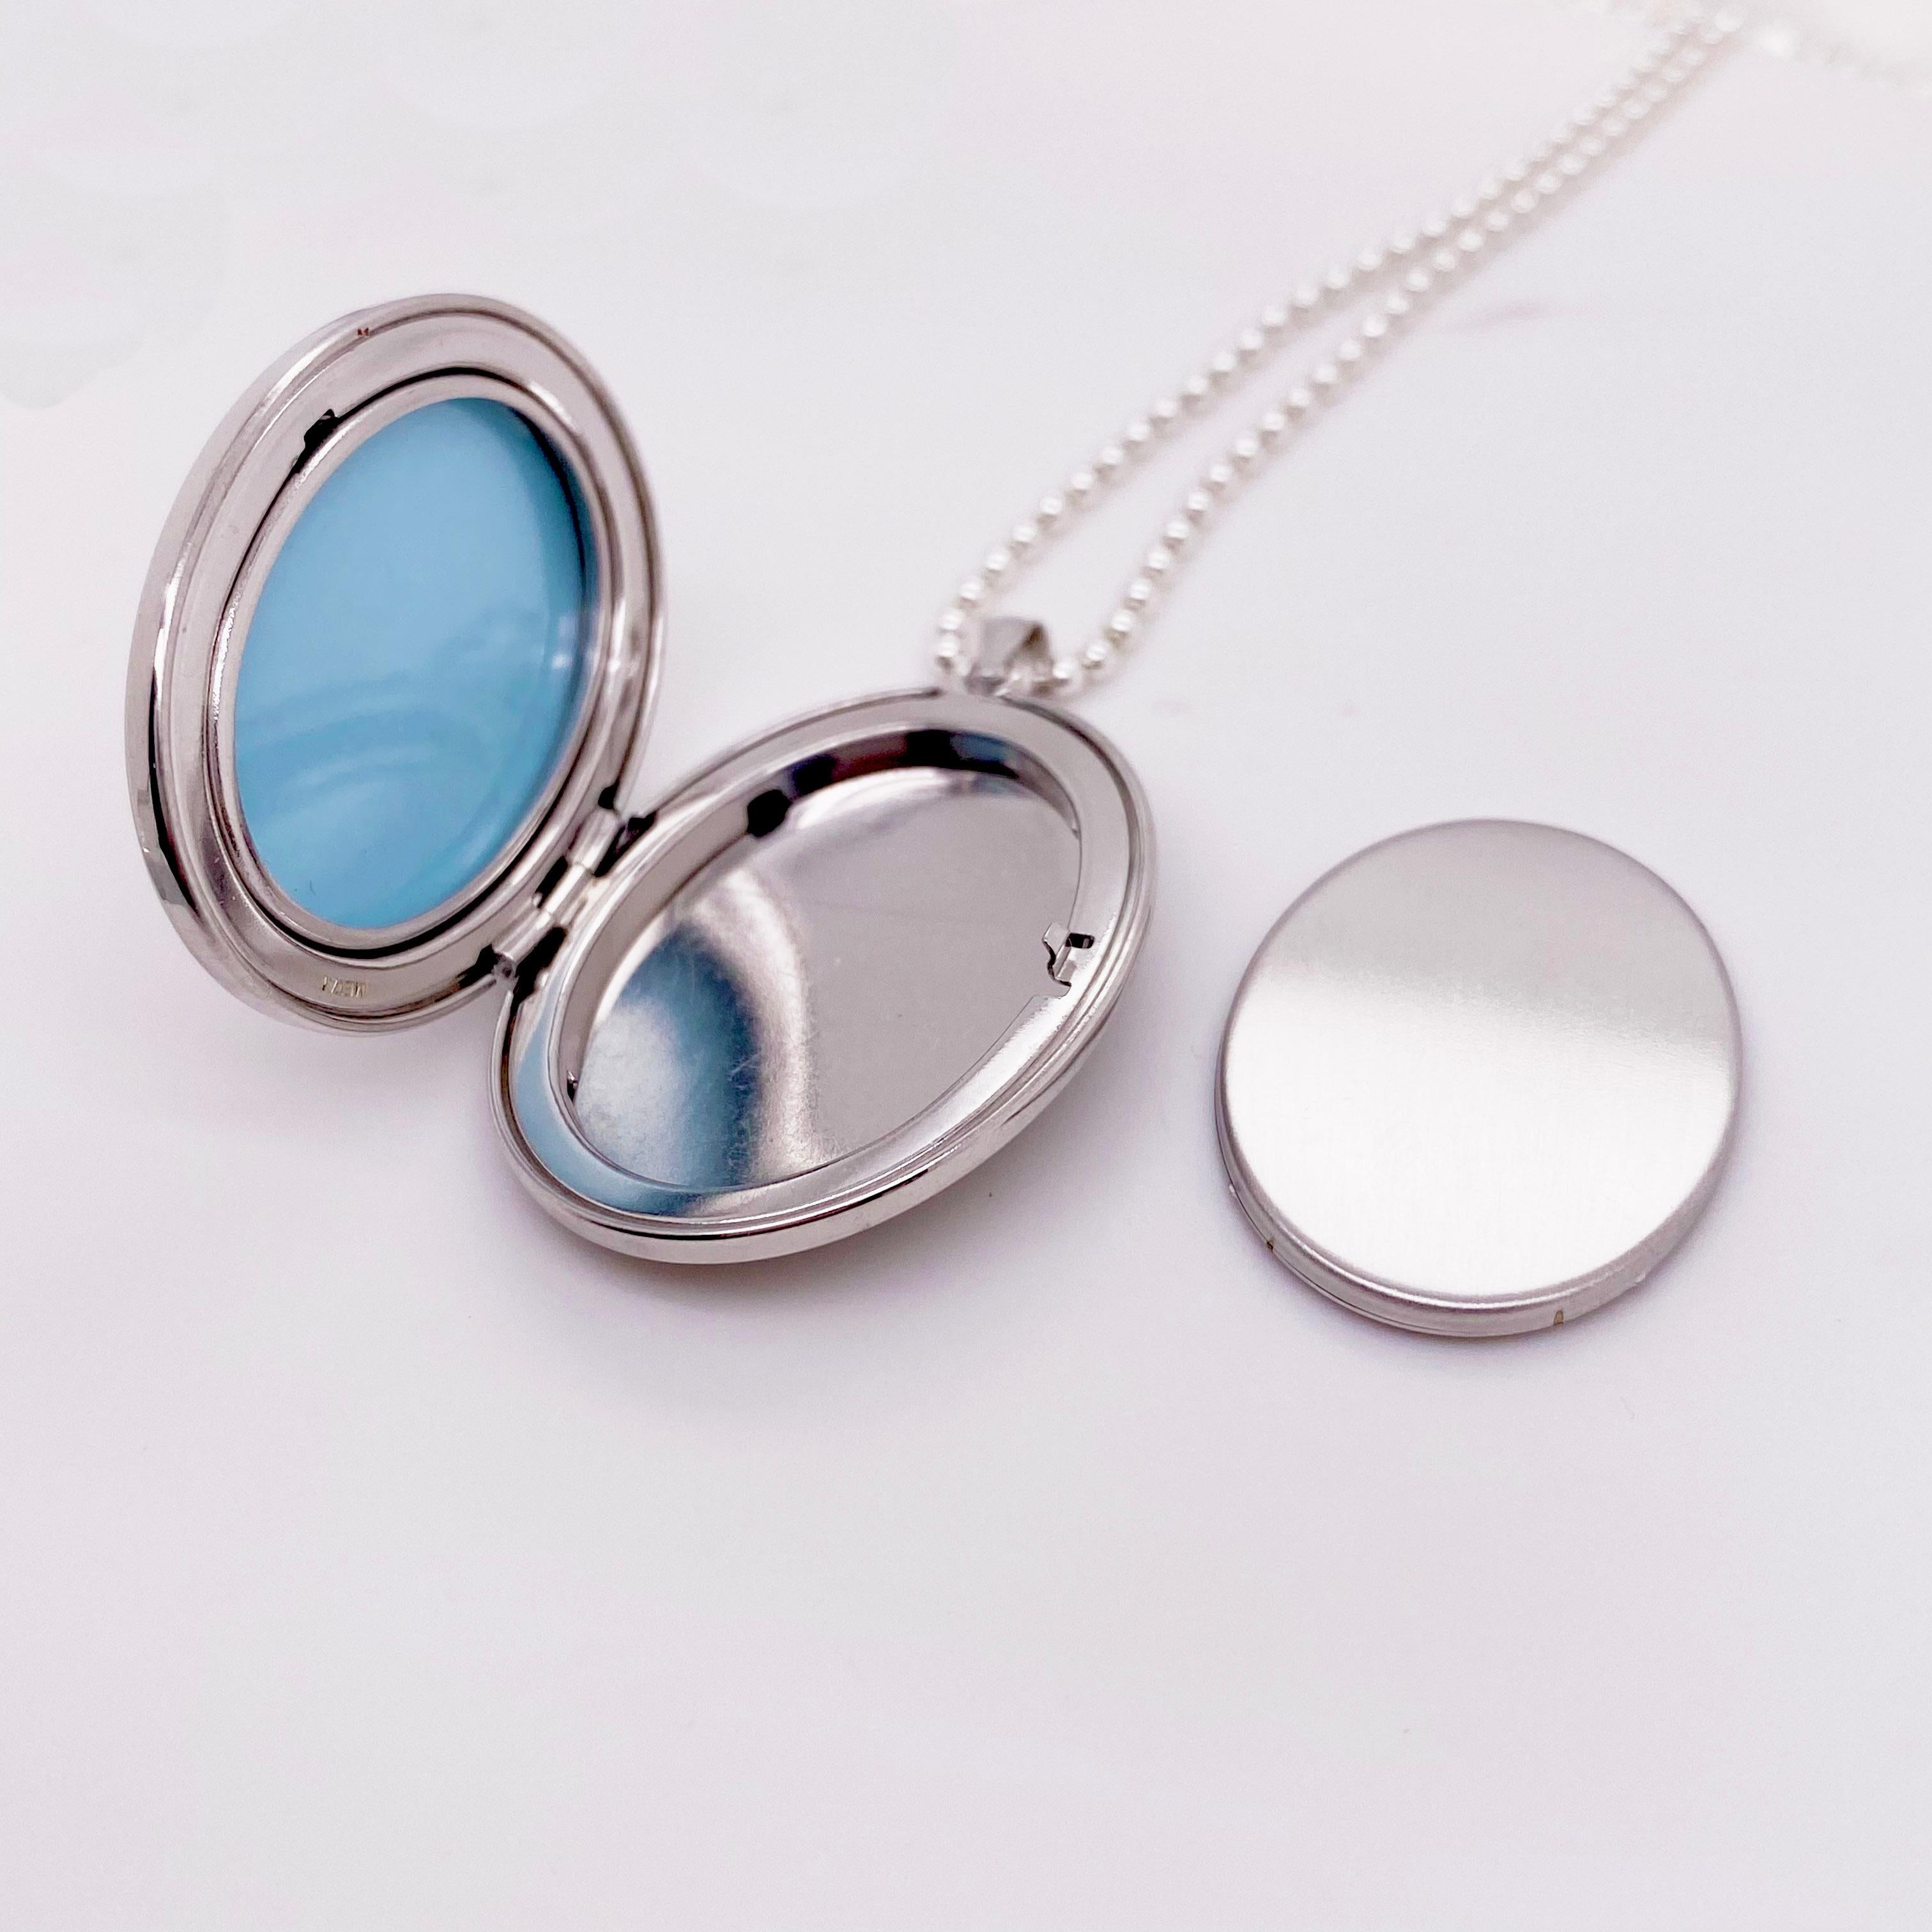 Round Cut Engraved Locket Necklace w Urn to Hold Loved One’s Ashes, Has One Diamond For Sale